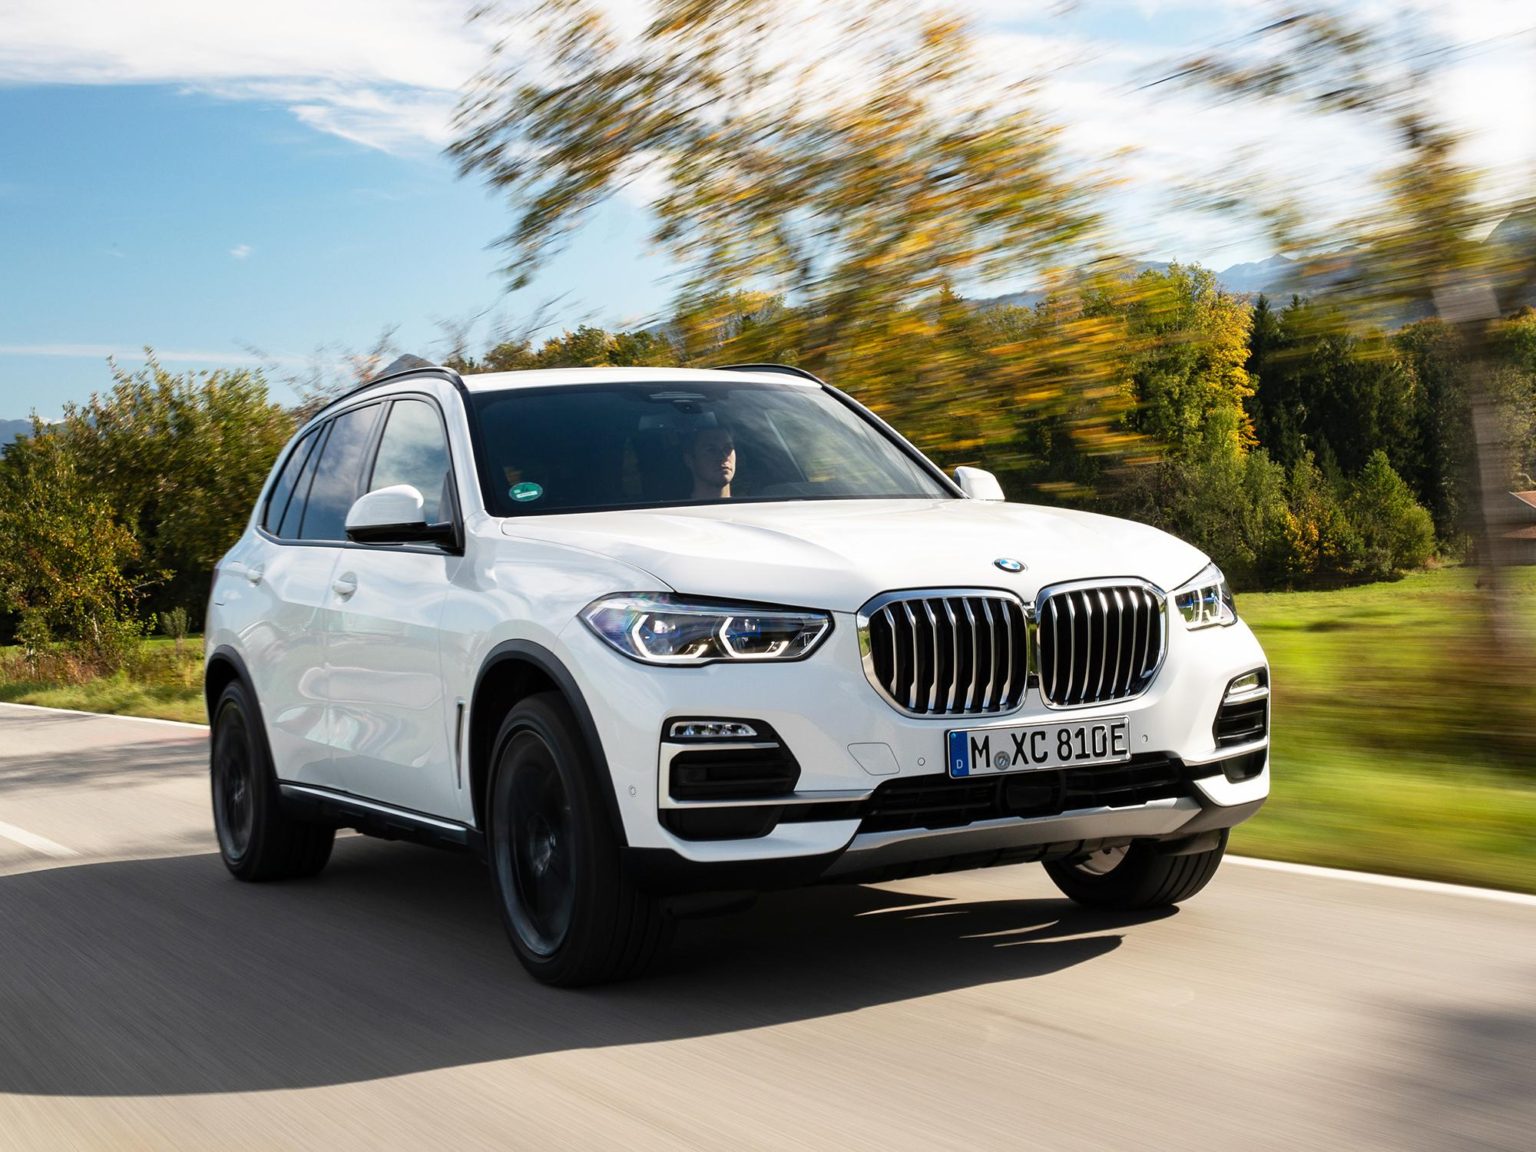 The new plug-in hybrid variant of the BMW X5 gets its electrified components right, but other features wrong.